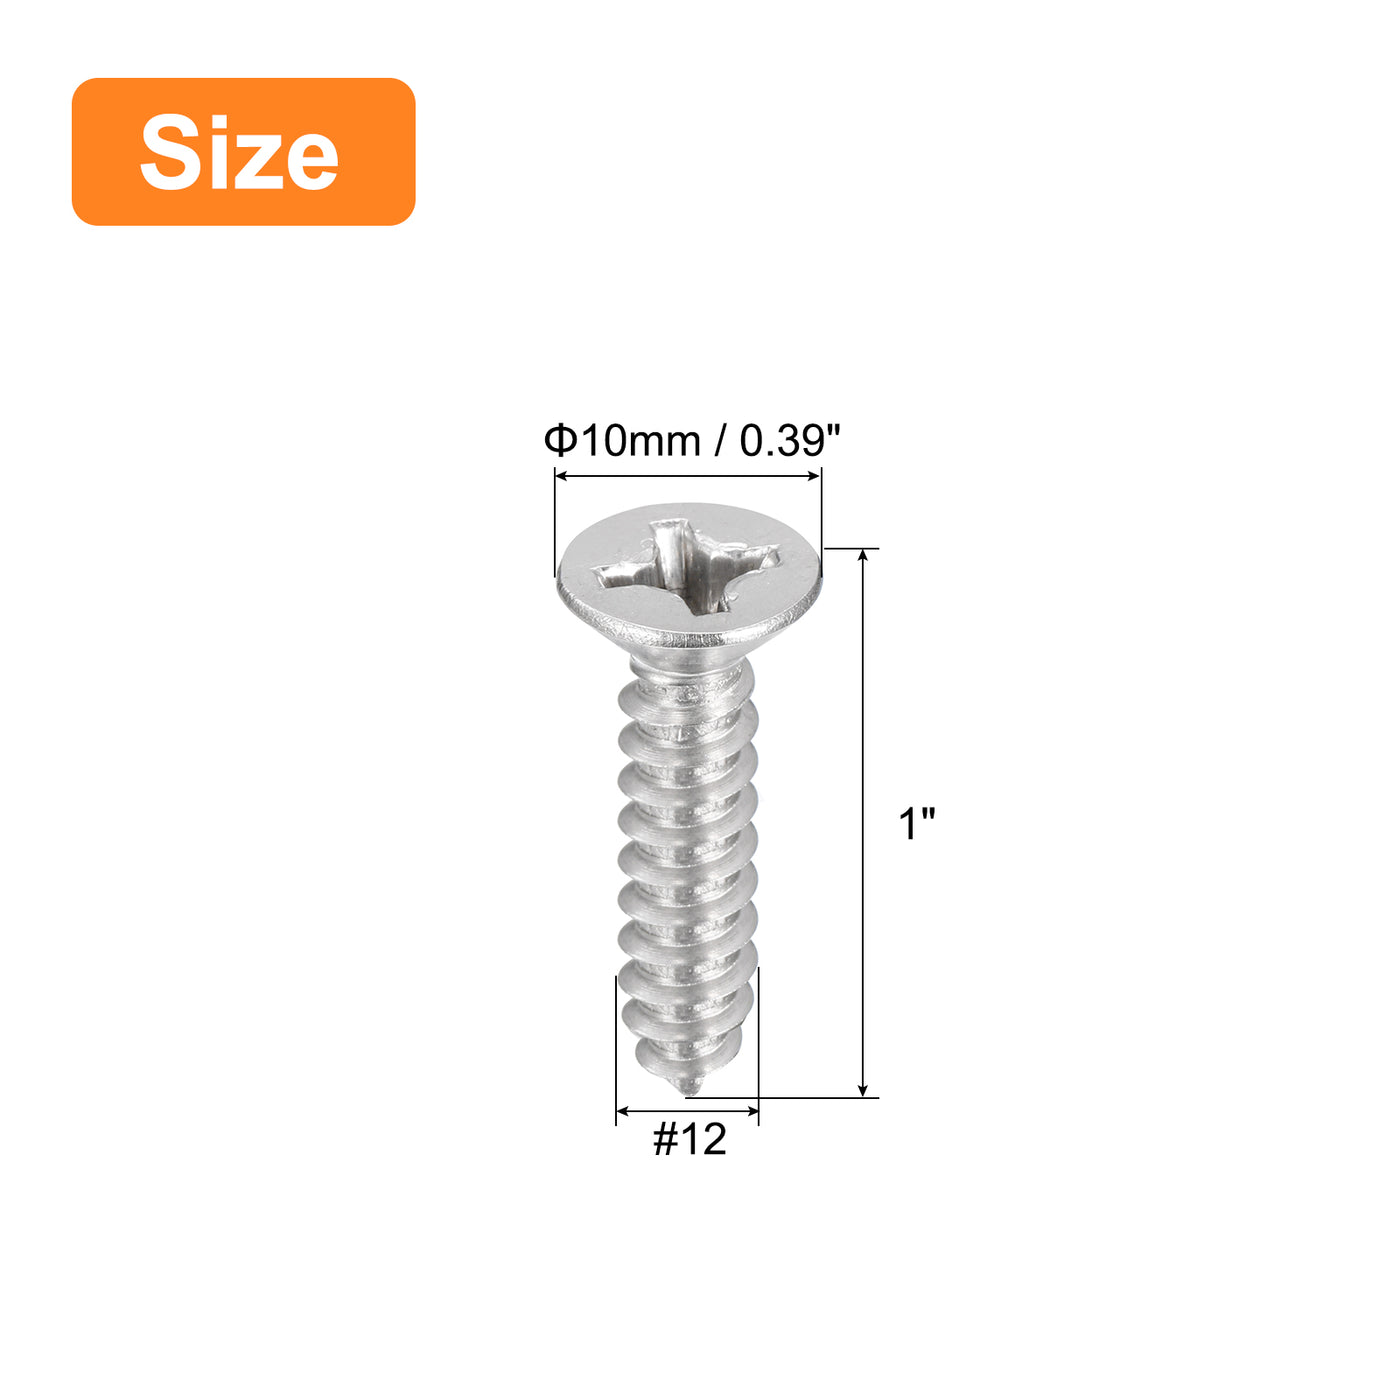 uxcell Uxcell #12x1" Wood Screws, 25pcs Phillips Self Tapping Screws 304 Stainless Steel